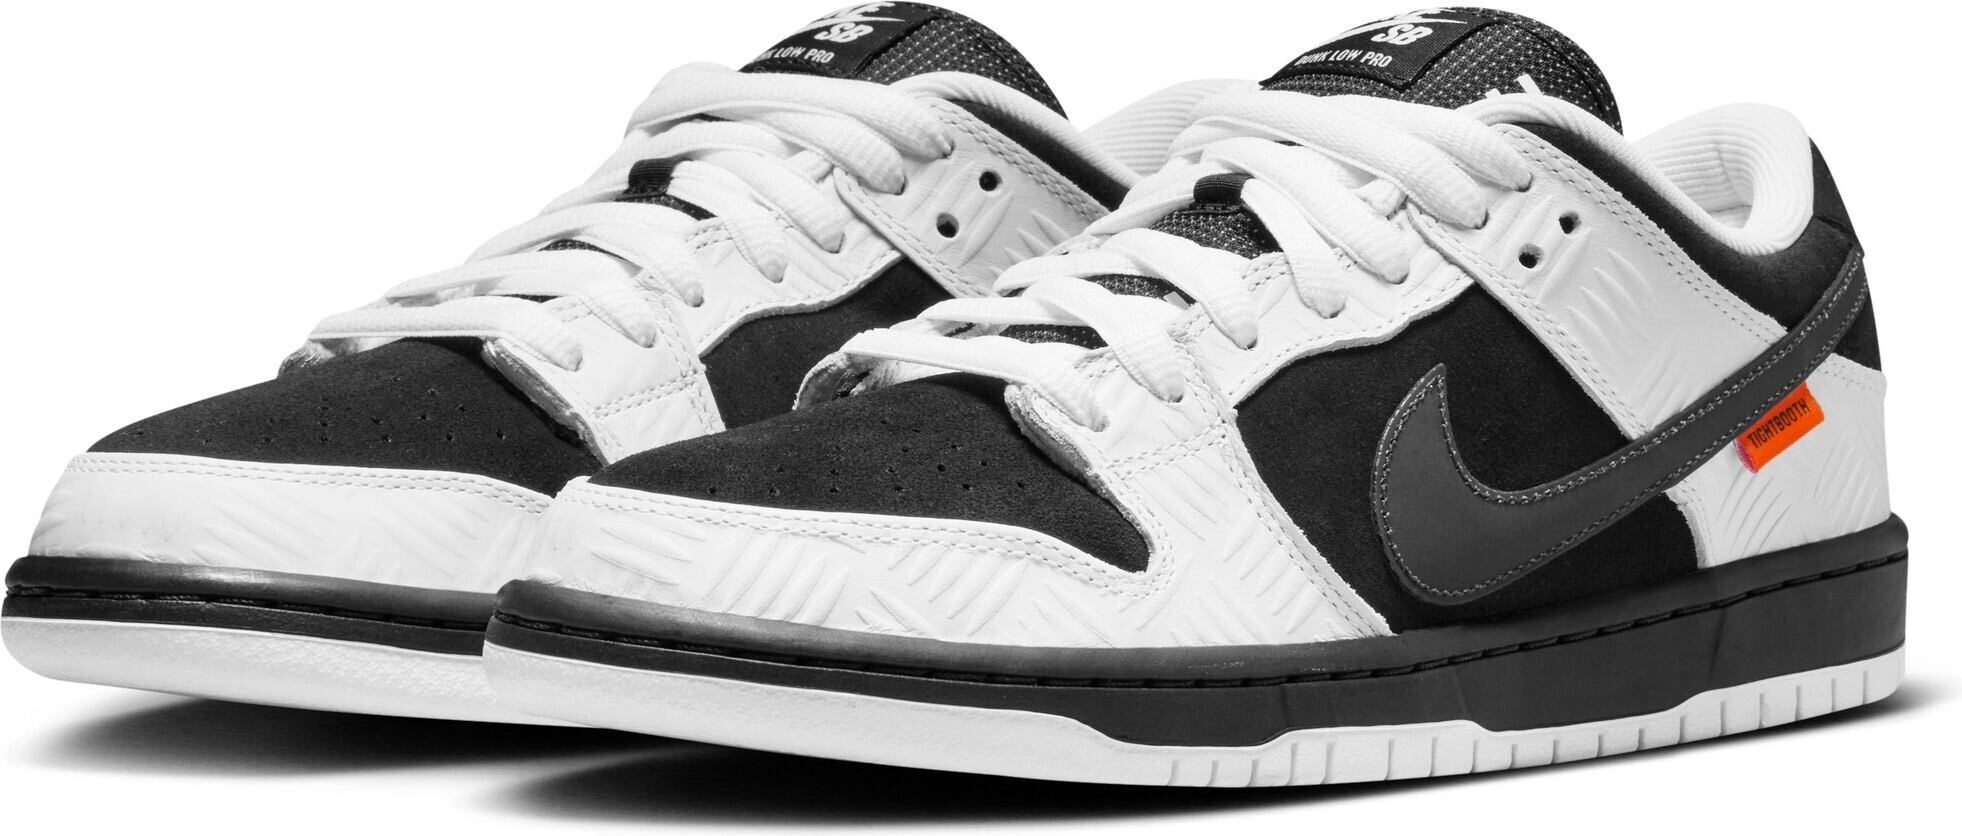 TIGHTBOOTH × NIKE SB DUNK LOW PRO / FD2629-100 | TIGHTBOOTH × NIKE SB DUNK  LOW PRO WEB抽選特設販売ショップ powered by BASE